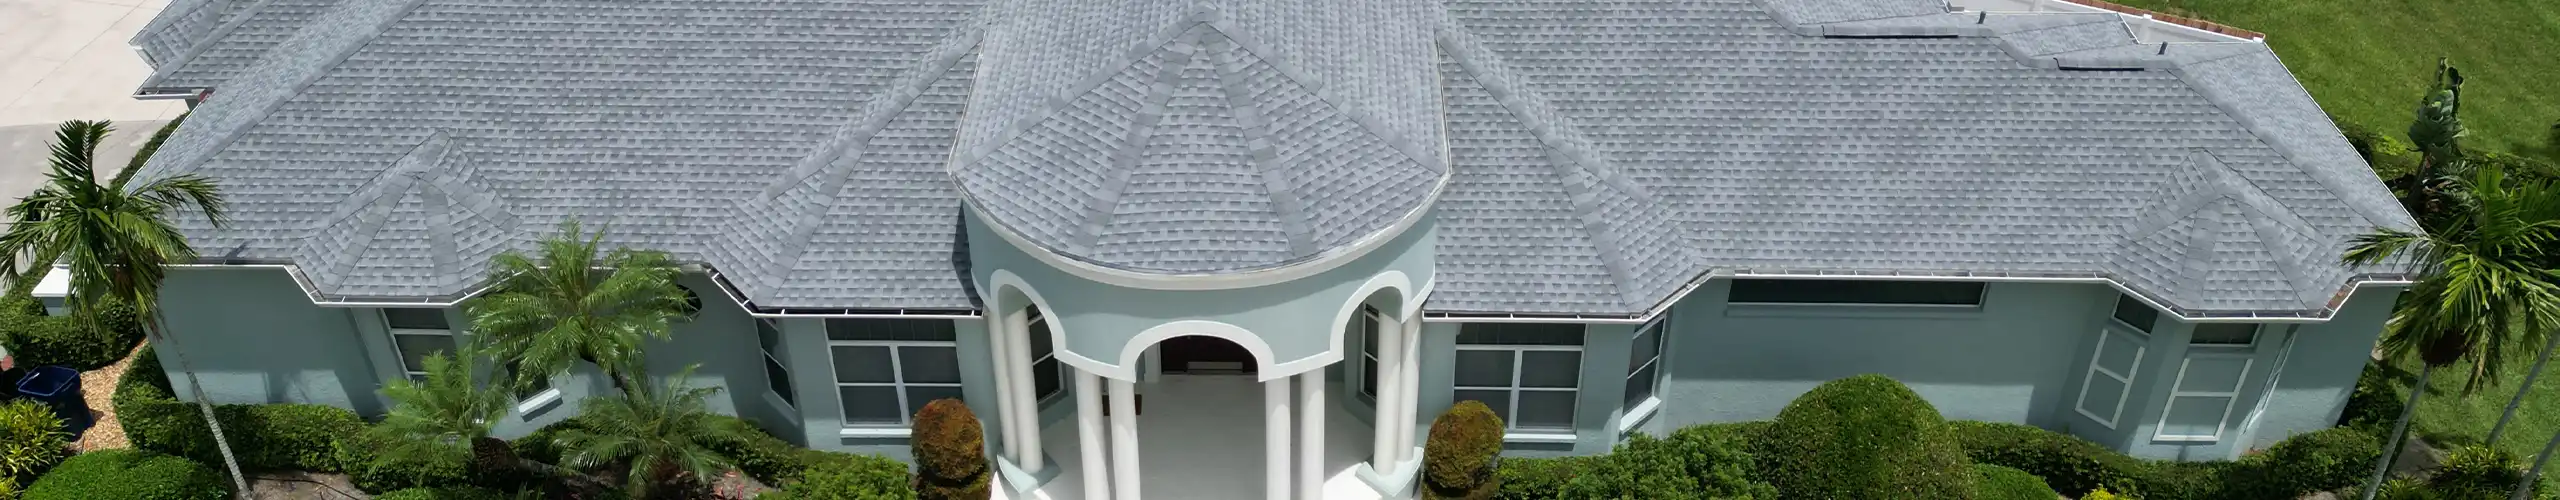 Finding Residential Roofers in Sarasota